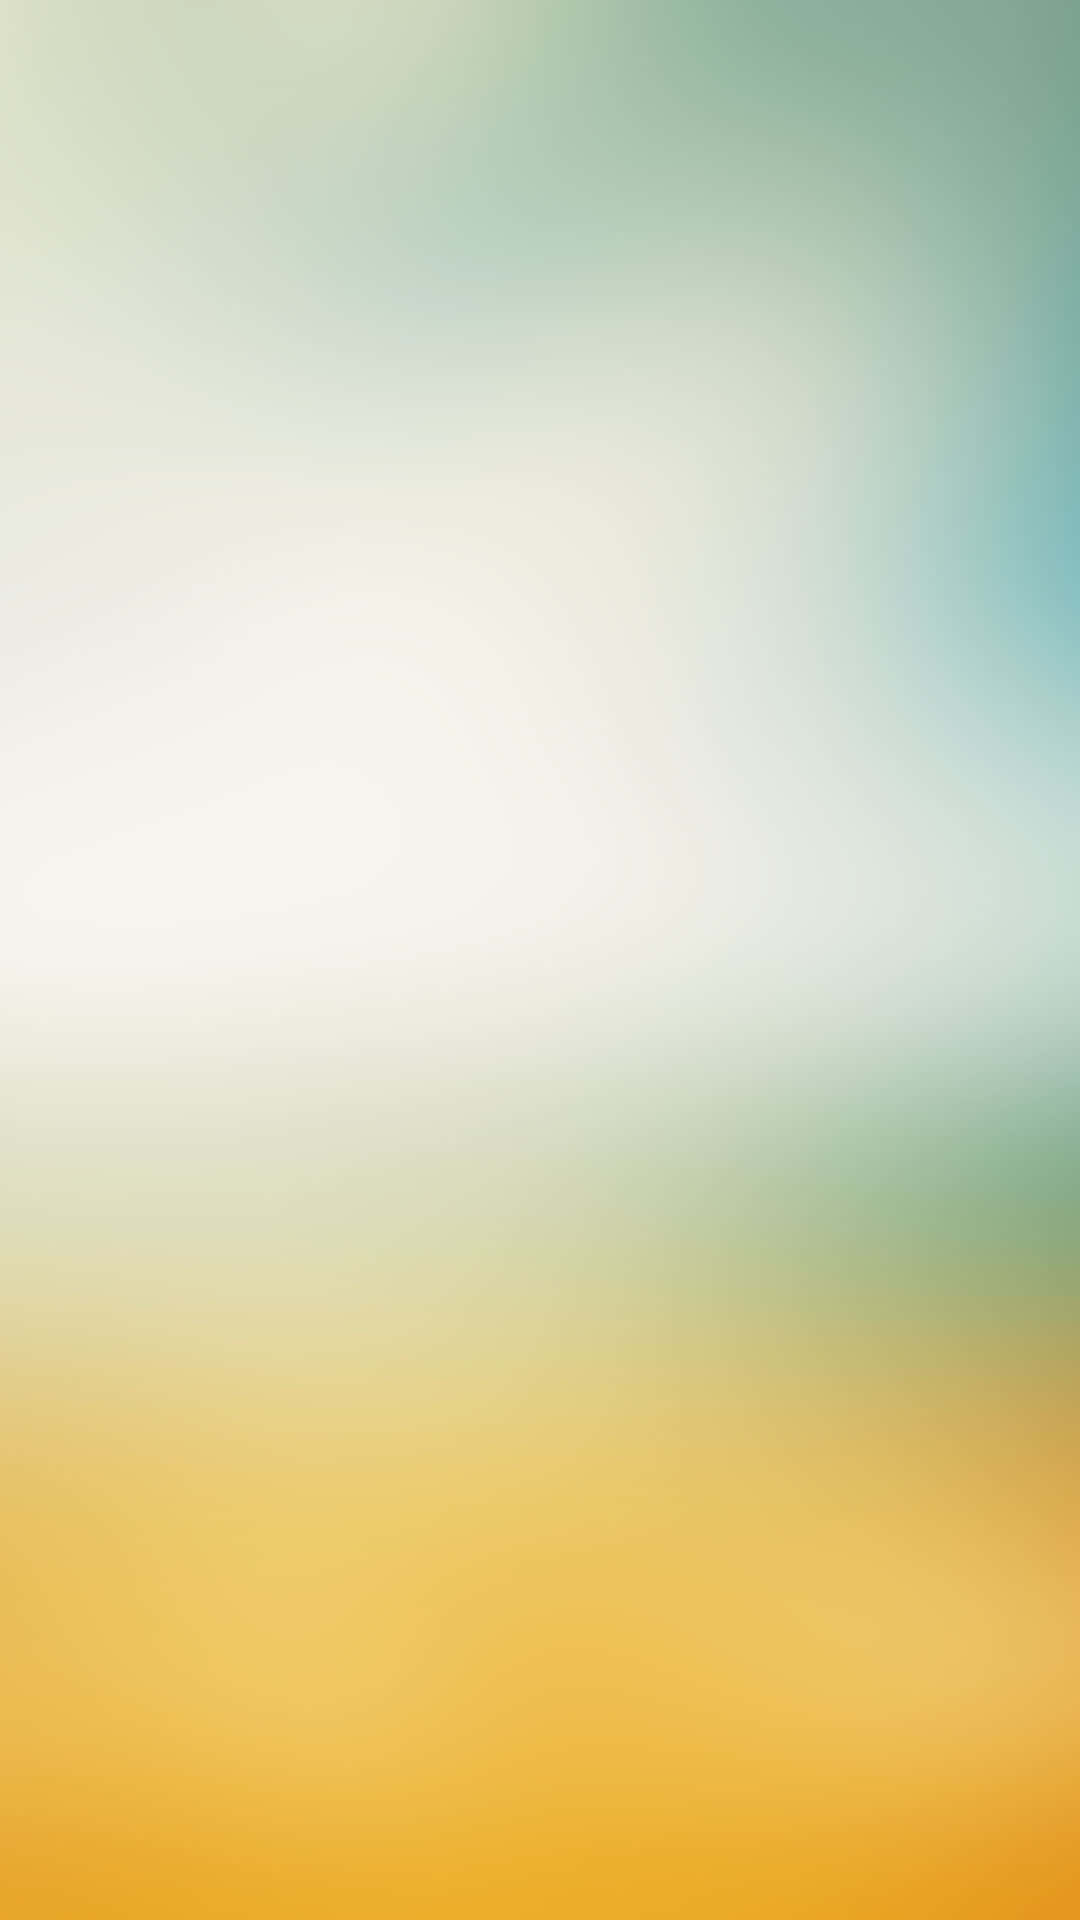 Blurry Background Light Blue And Yellow Tones 1080 x 1920 Background